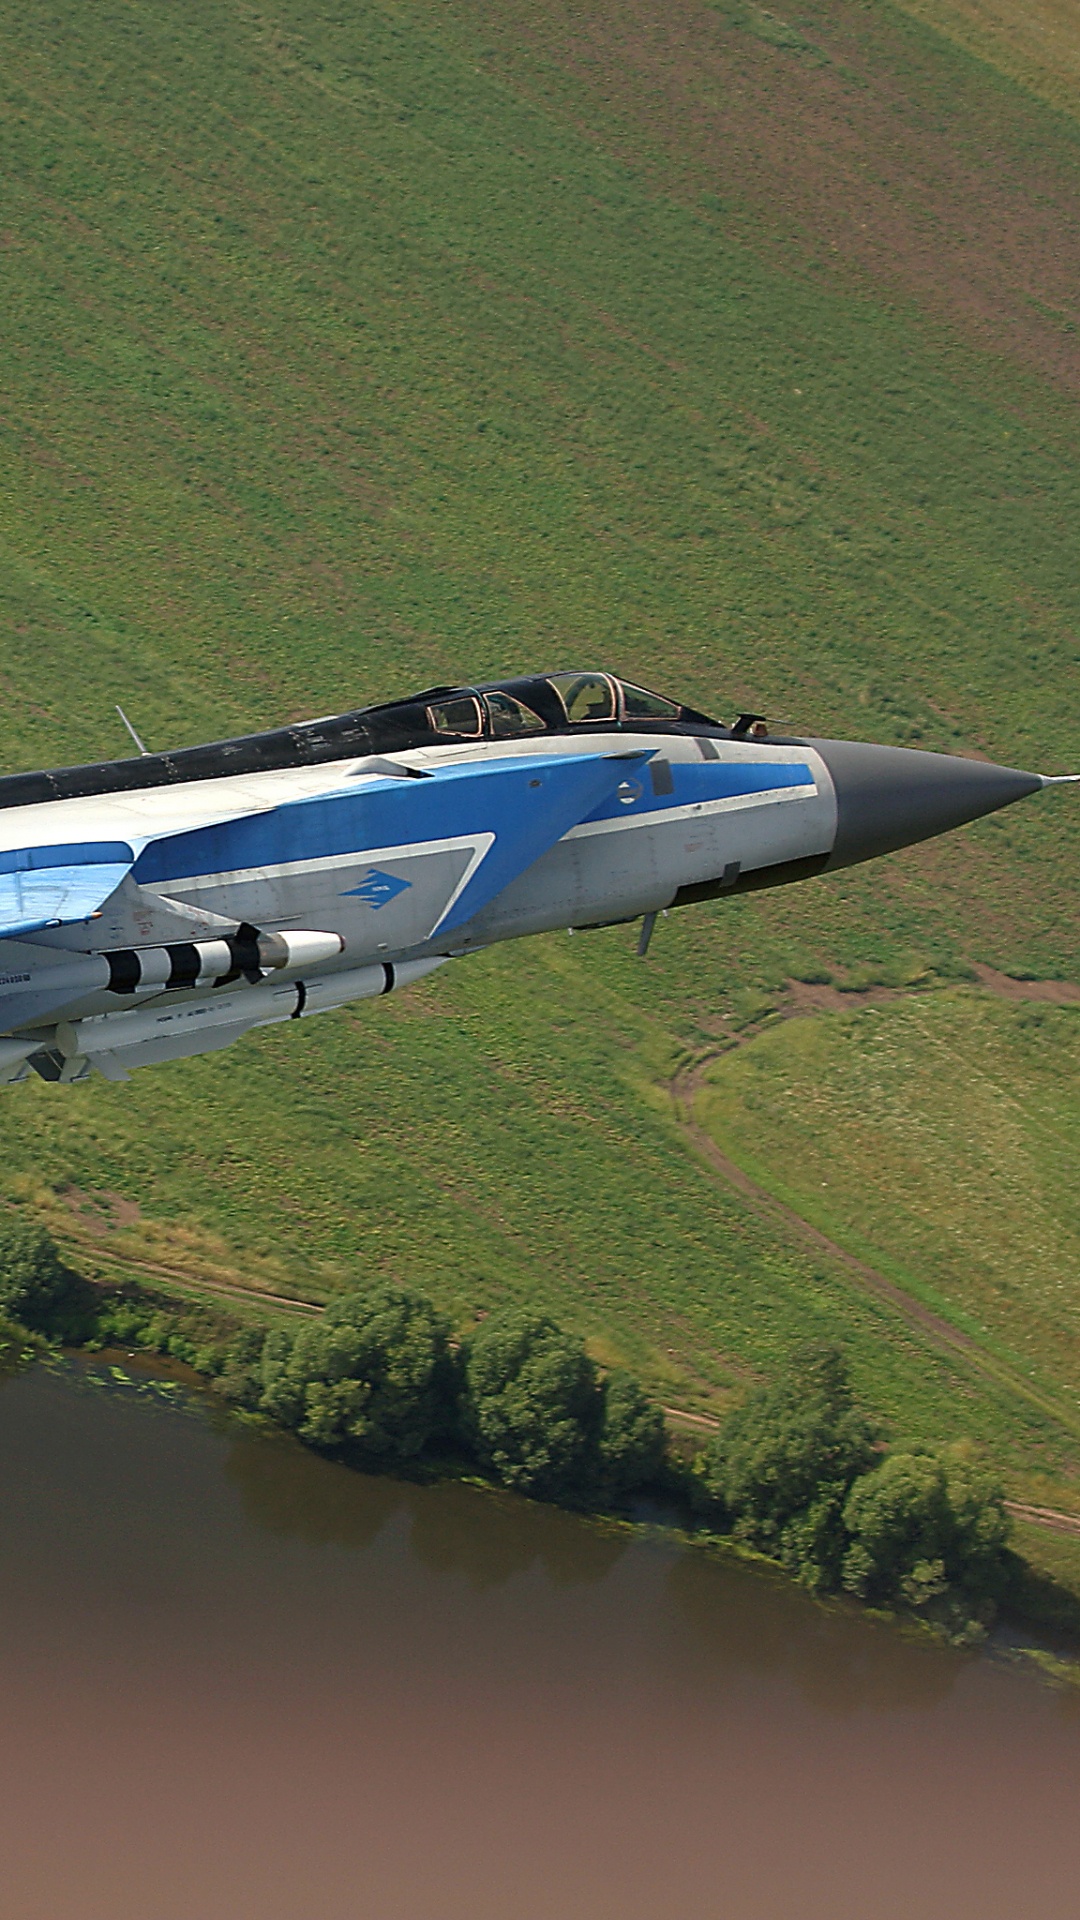 Blue and White Jet Plane Flying Over Green Grass Field During Daytime. Wallpaper in 1080x1920 Resolution